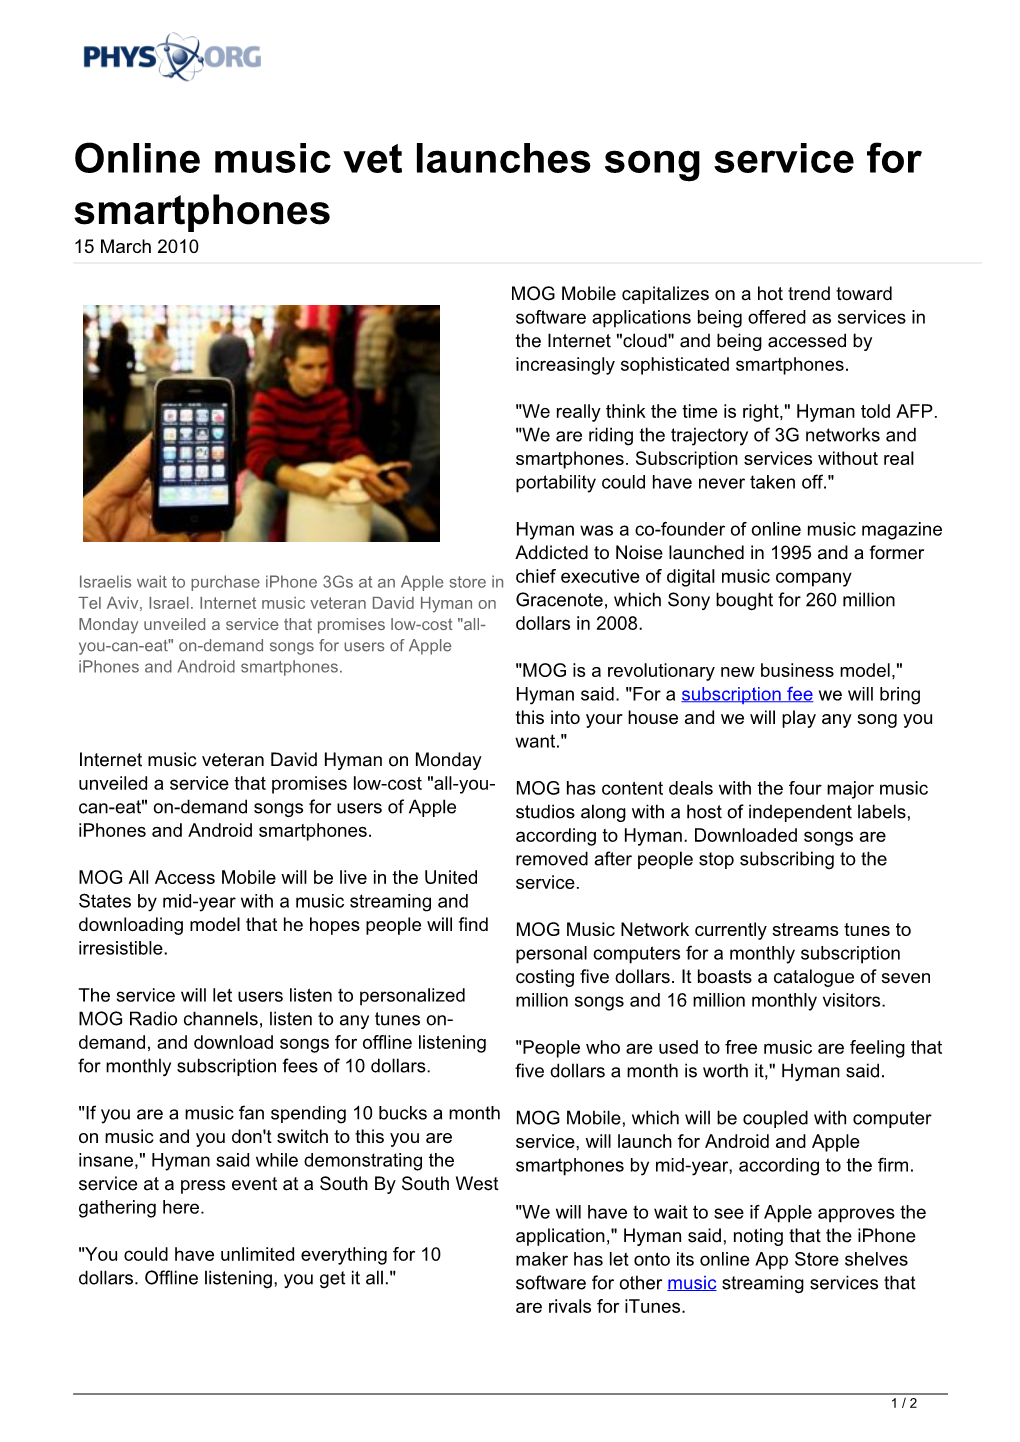 Online Music Vet Launches Song Service for Smartphones 15 March 2010